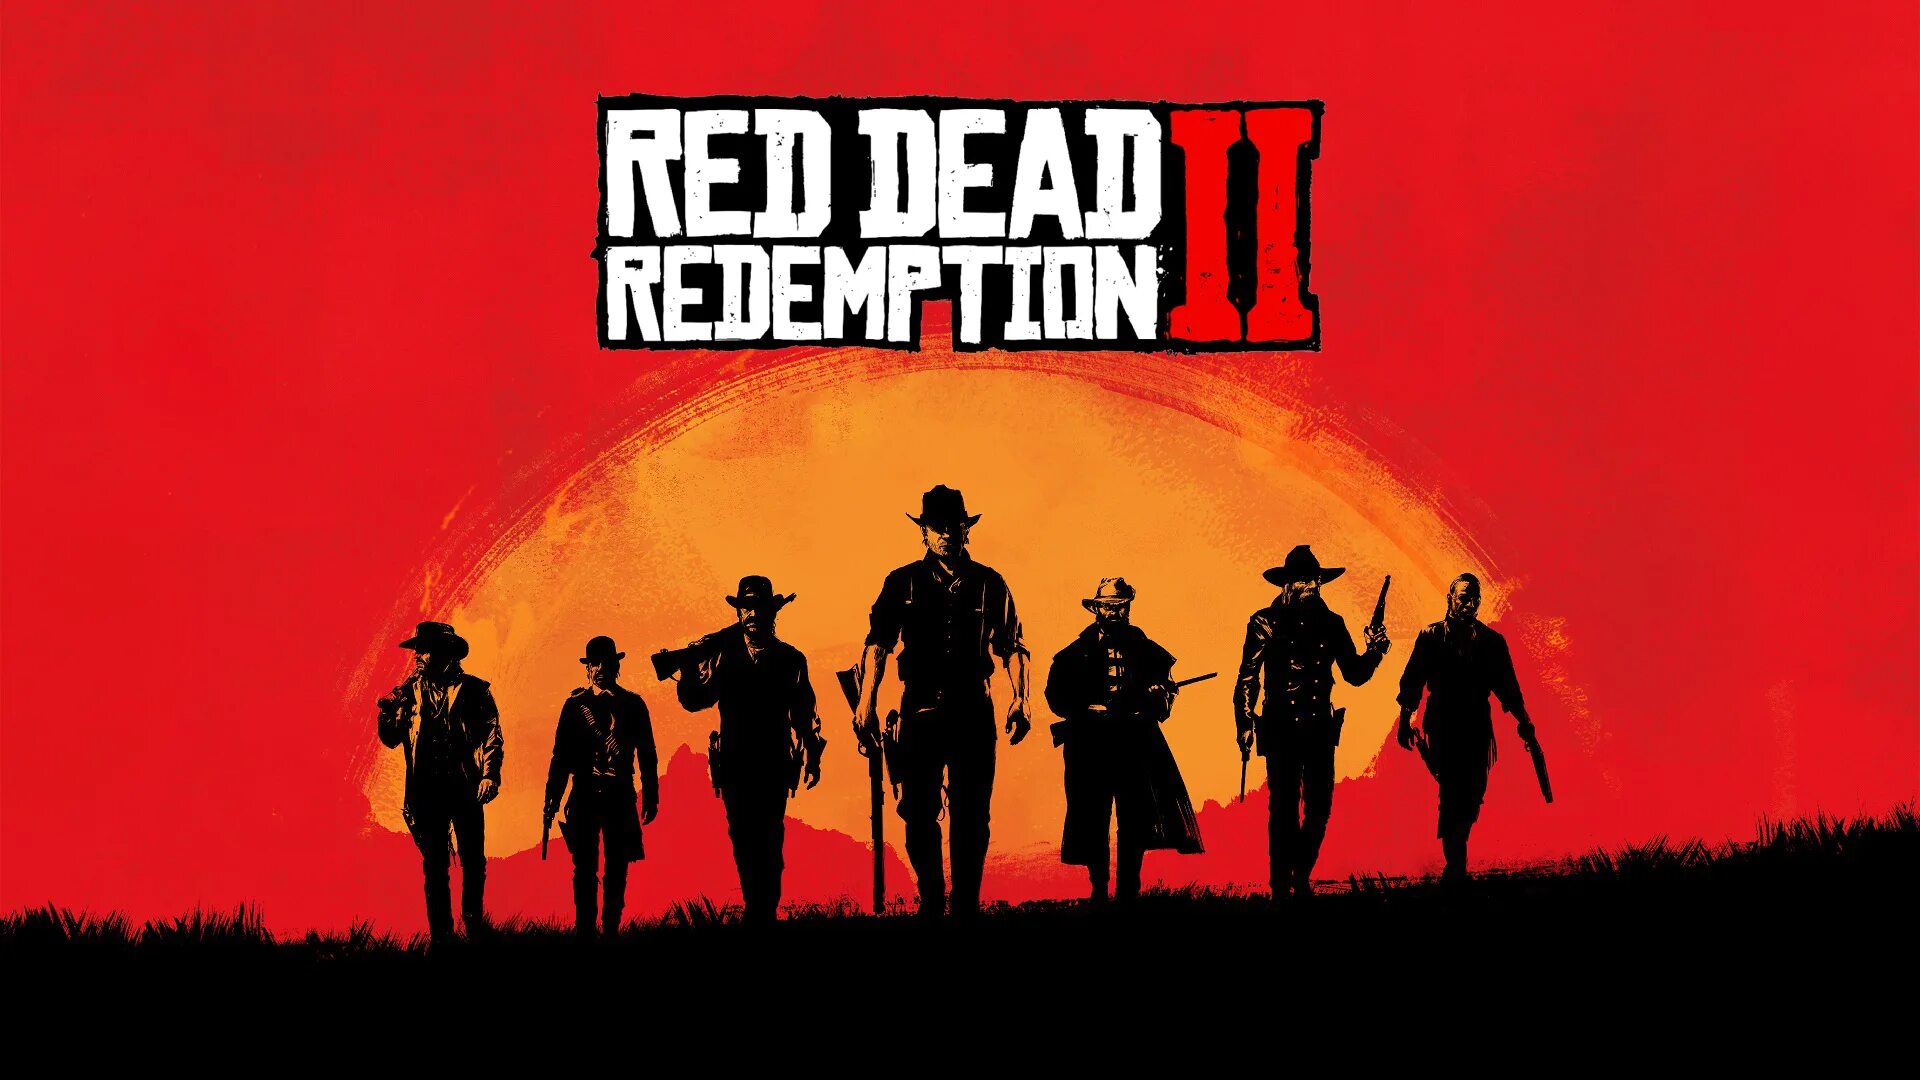 Рдр 2 плакат. Red Dead Redemption 2. Red Dead Redemption 2 обложка. Red Dead обложка Dead Redemption 2. Red Dead Redemption 2 Постер.